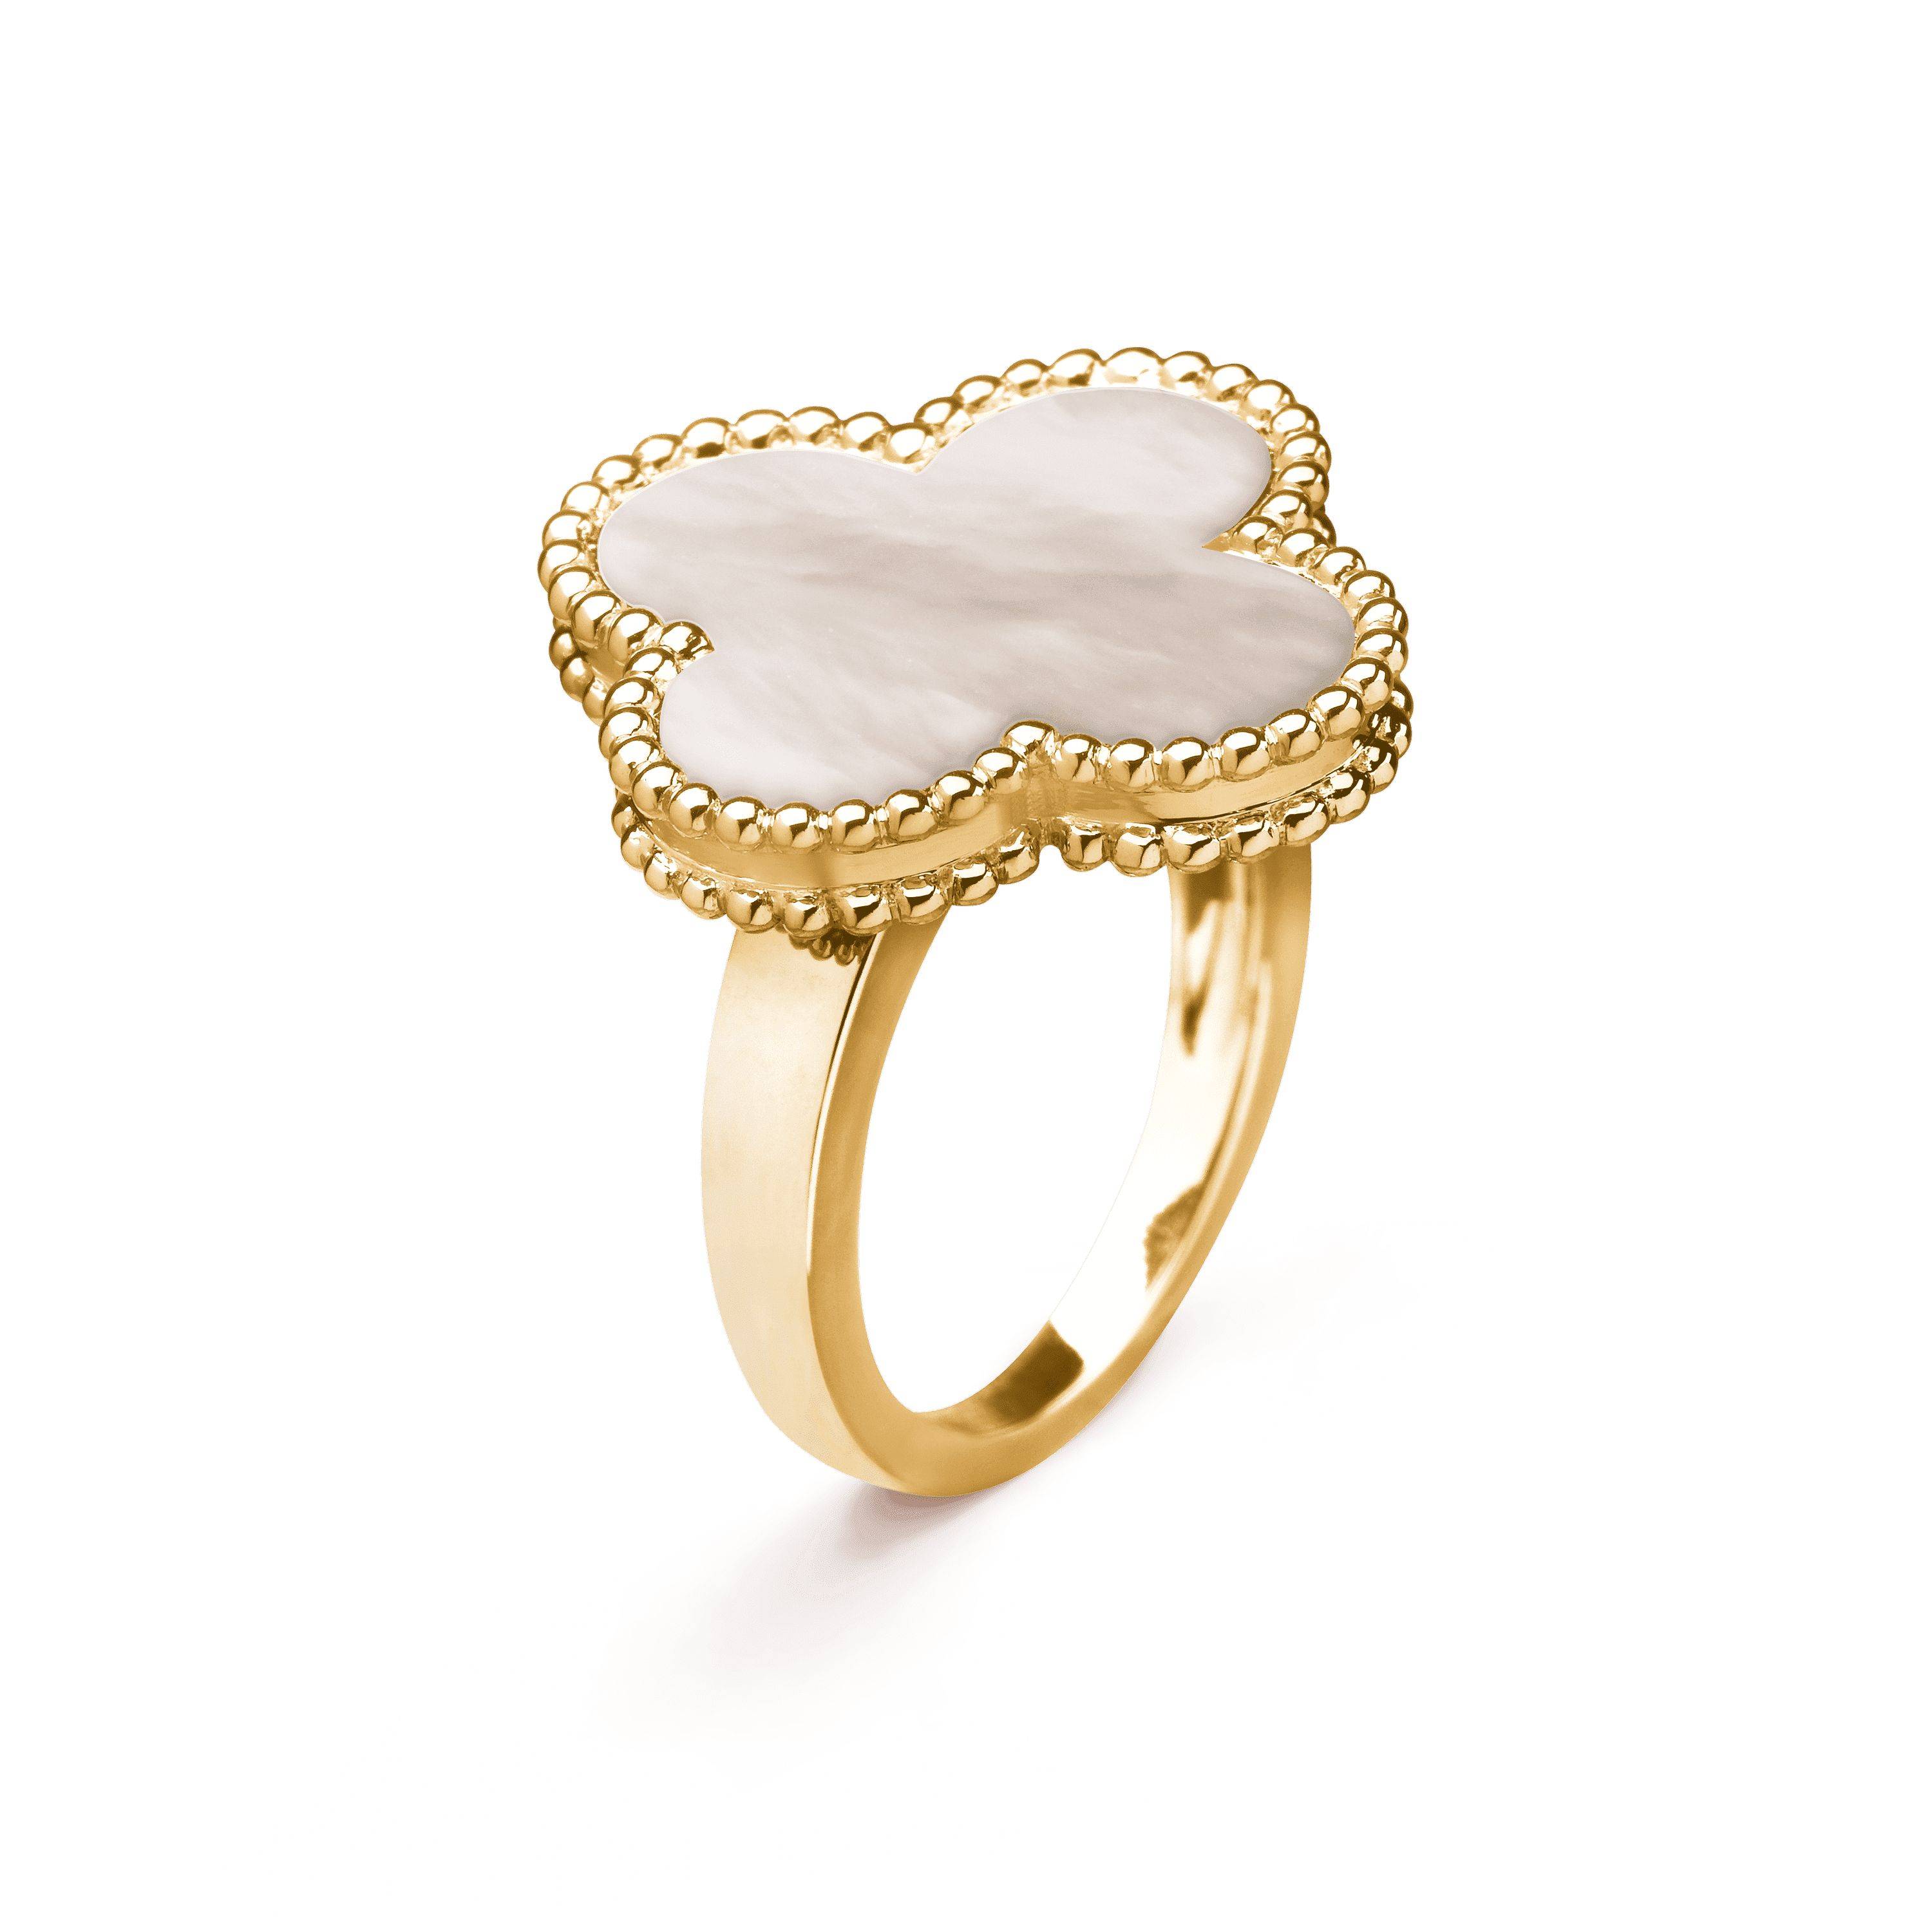 VAN CLEEF ARPELS MAGIC ALHAMBRA RING - YELLOW GOLD, MOTHER-OF-PEARL  VCARF78900